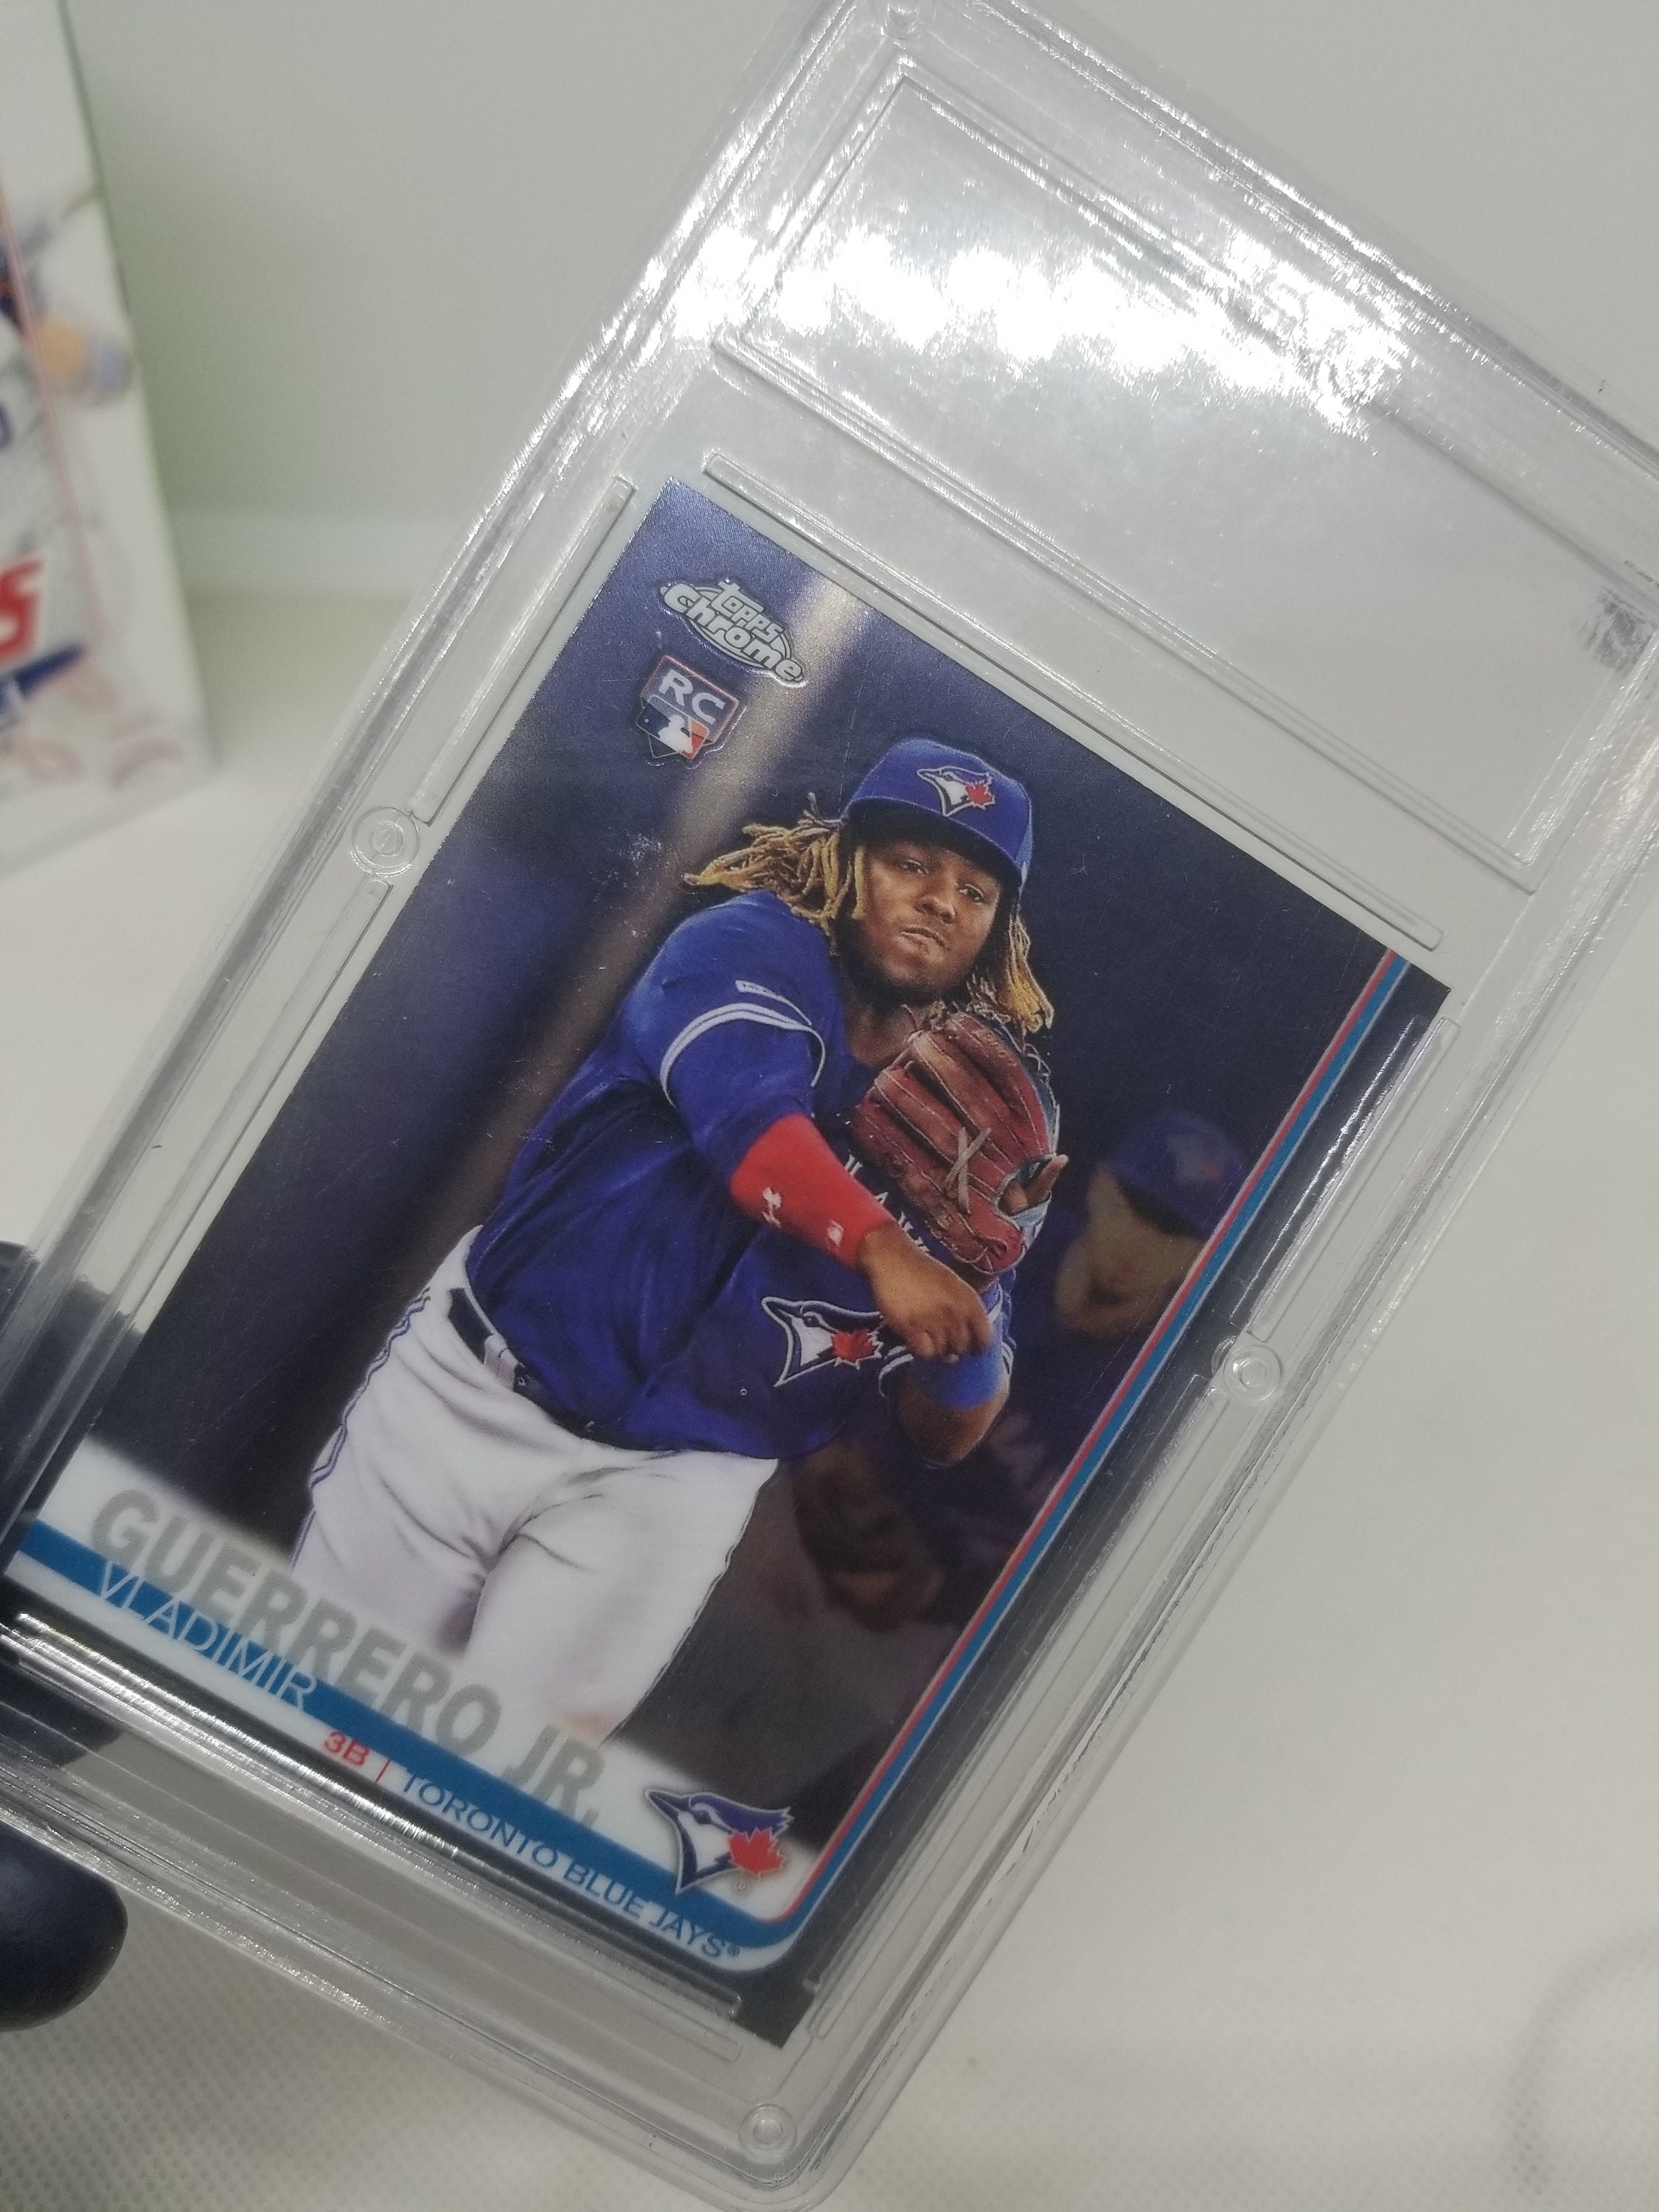 Vladimir Guerrero Jr.'s first Rookie Cards available now via Topps